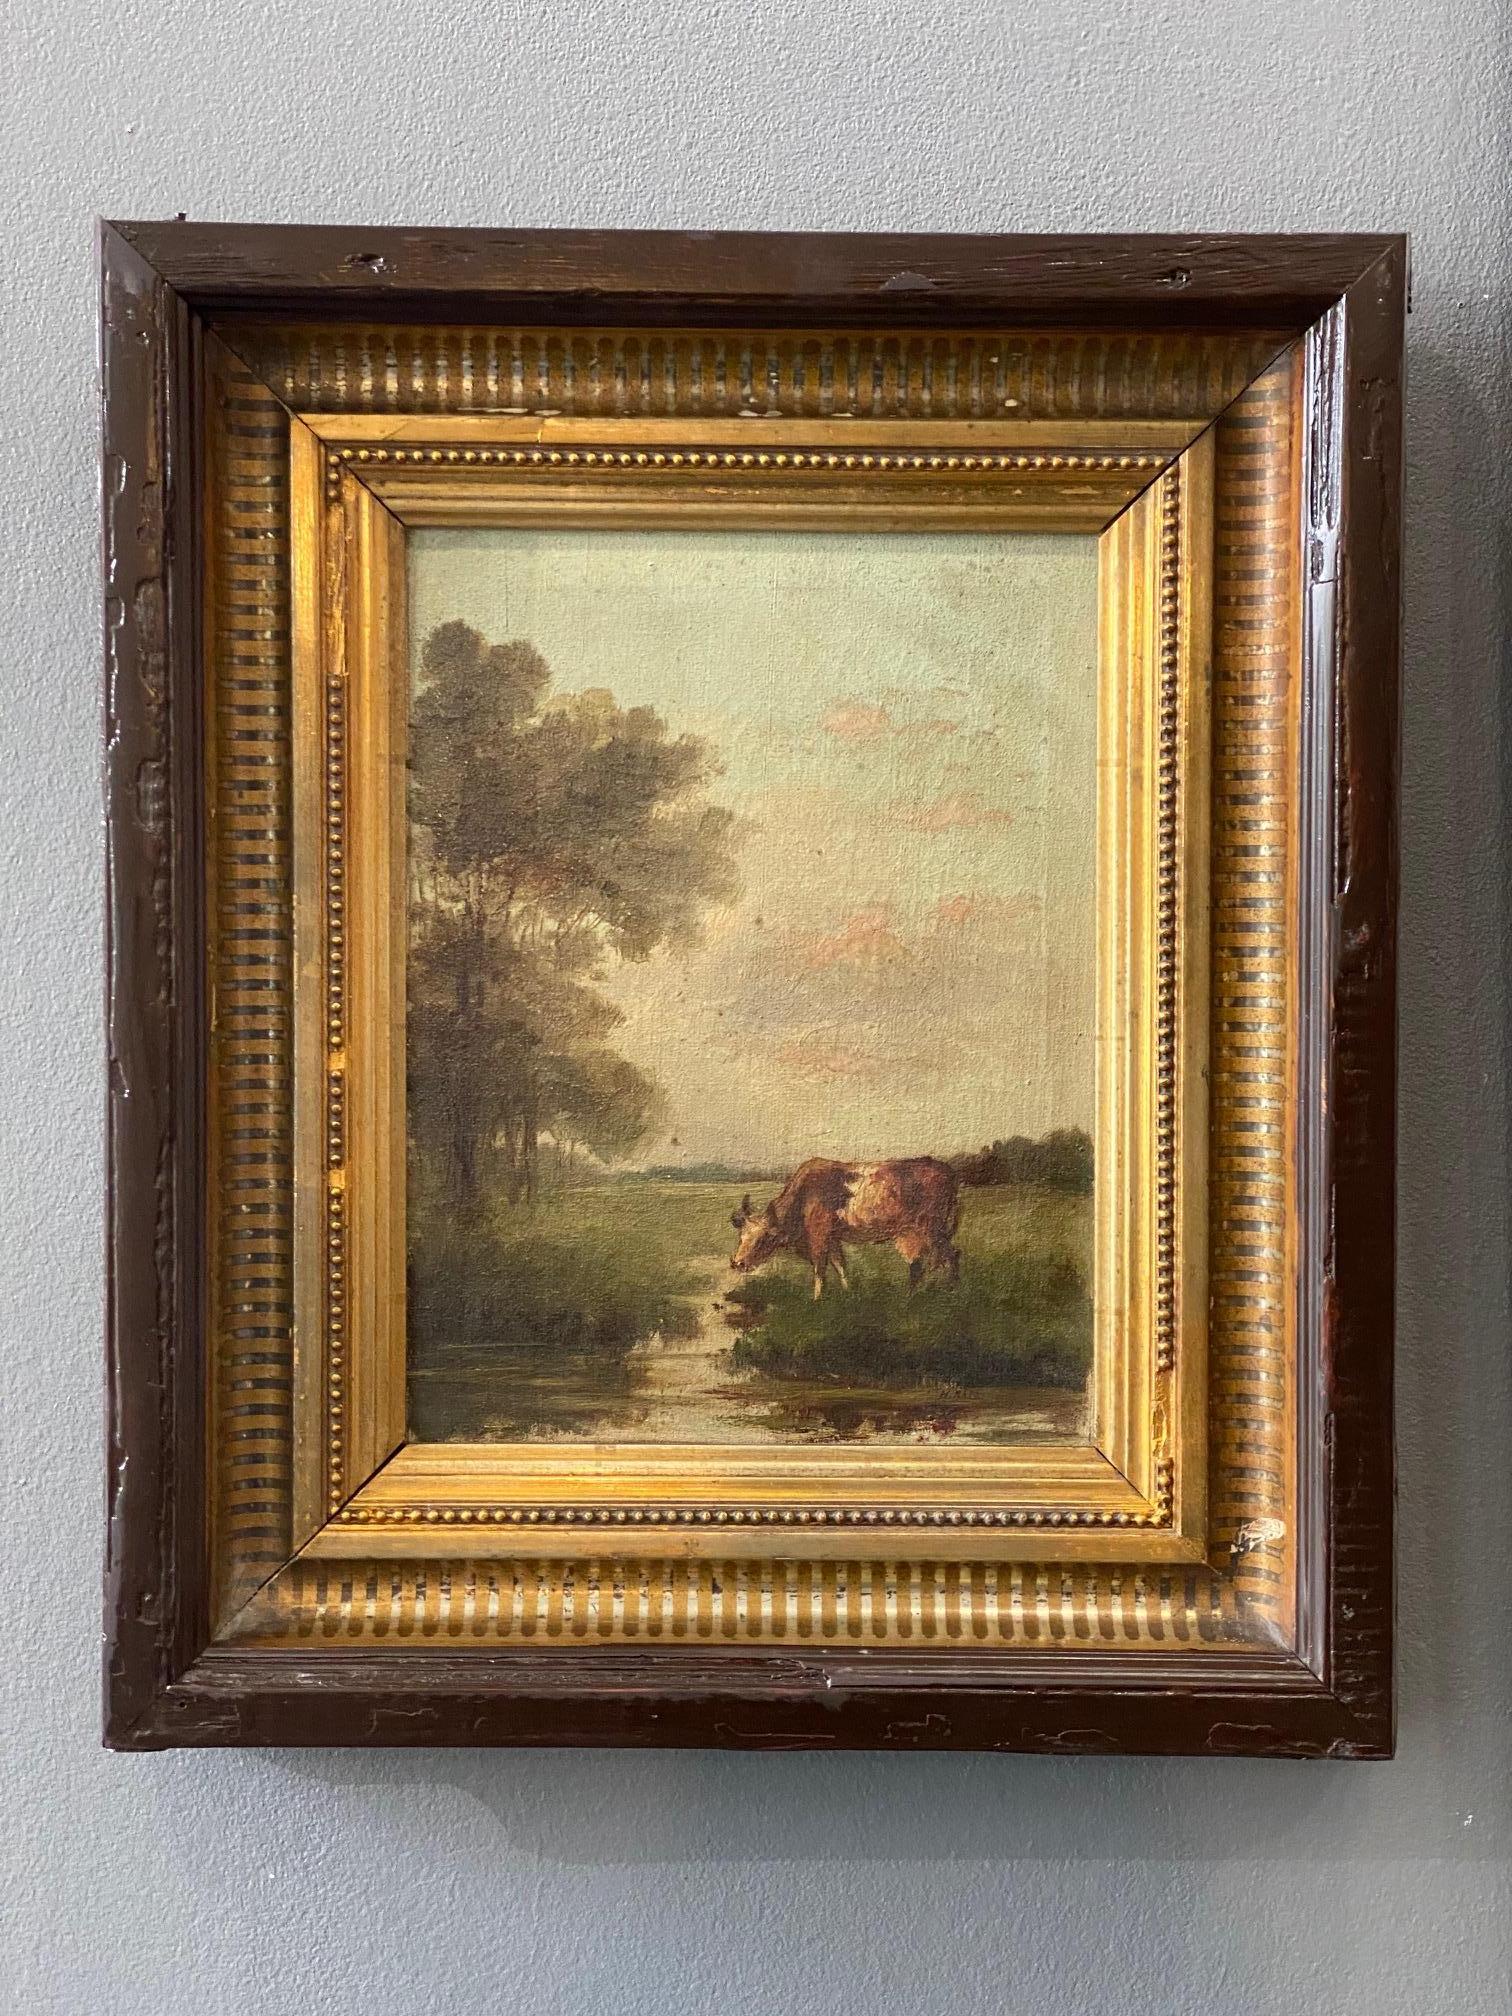 Cow in a field att. to Henri Baes - Oil on canvas 24x31 cm For Sale 3